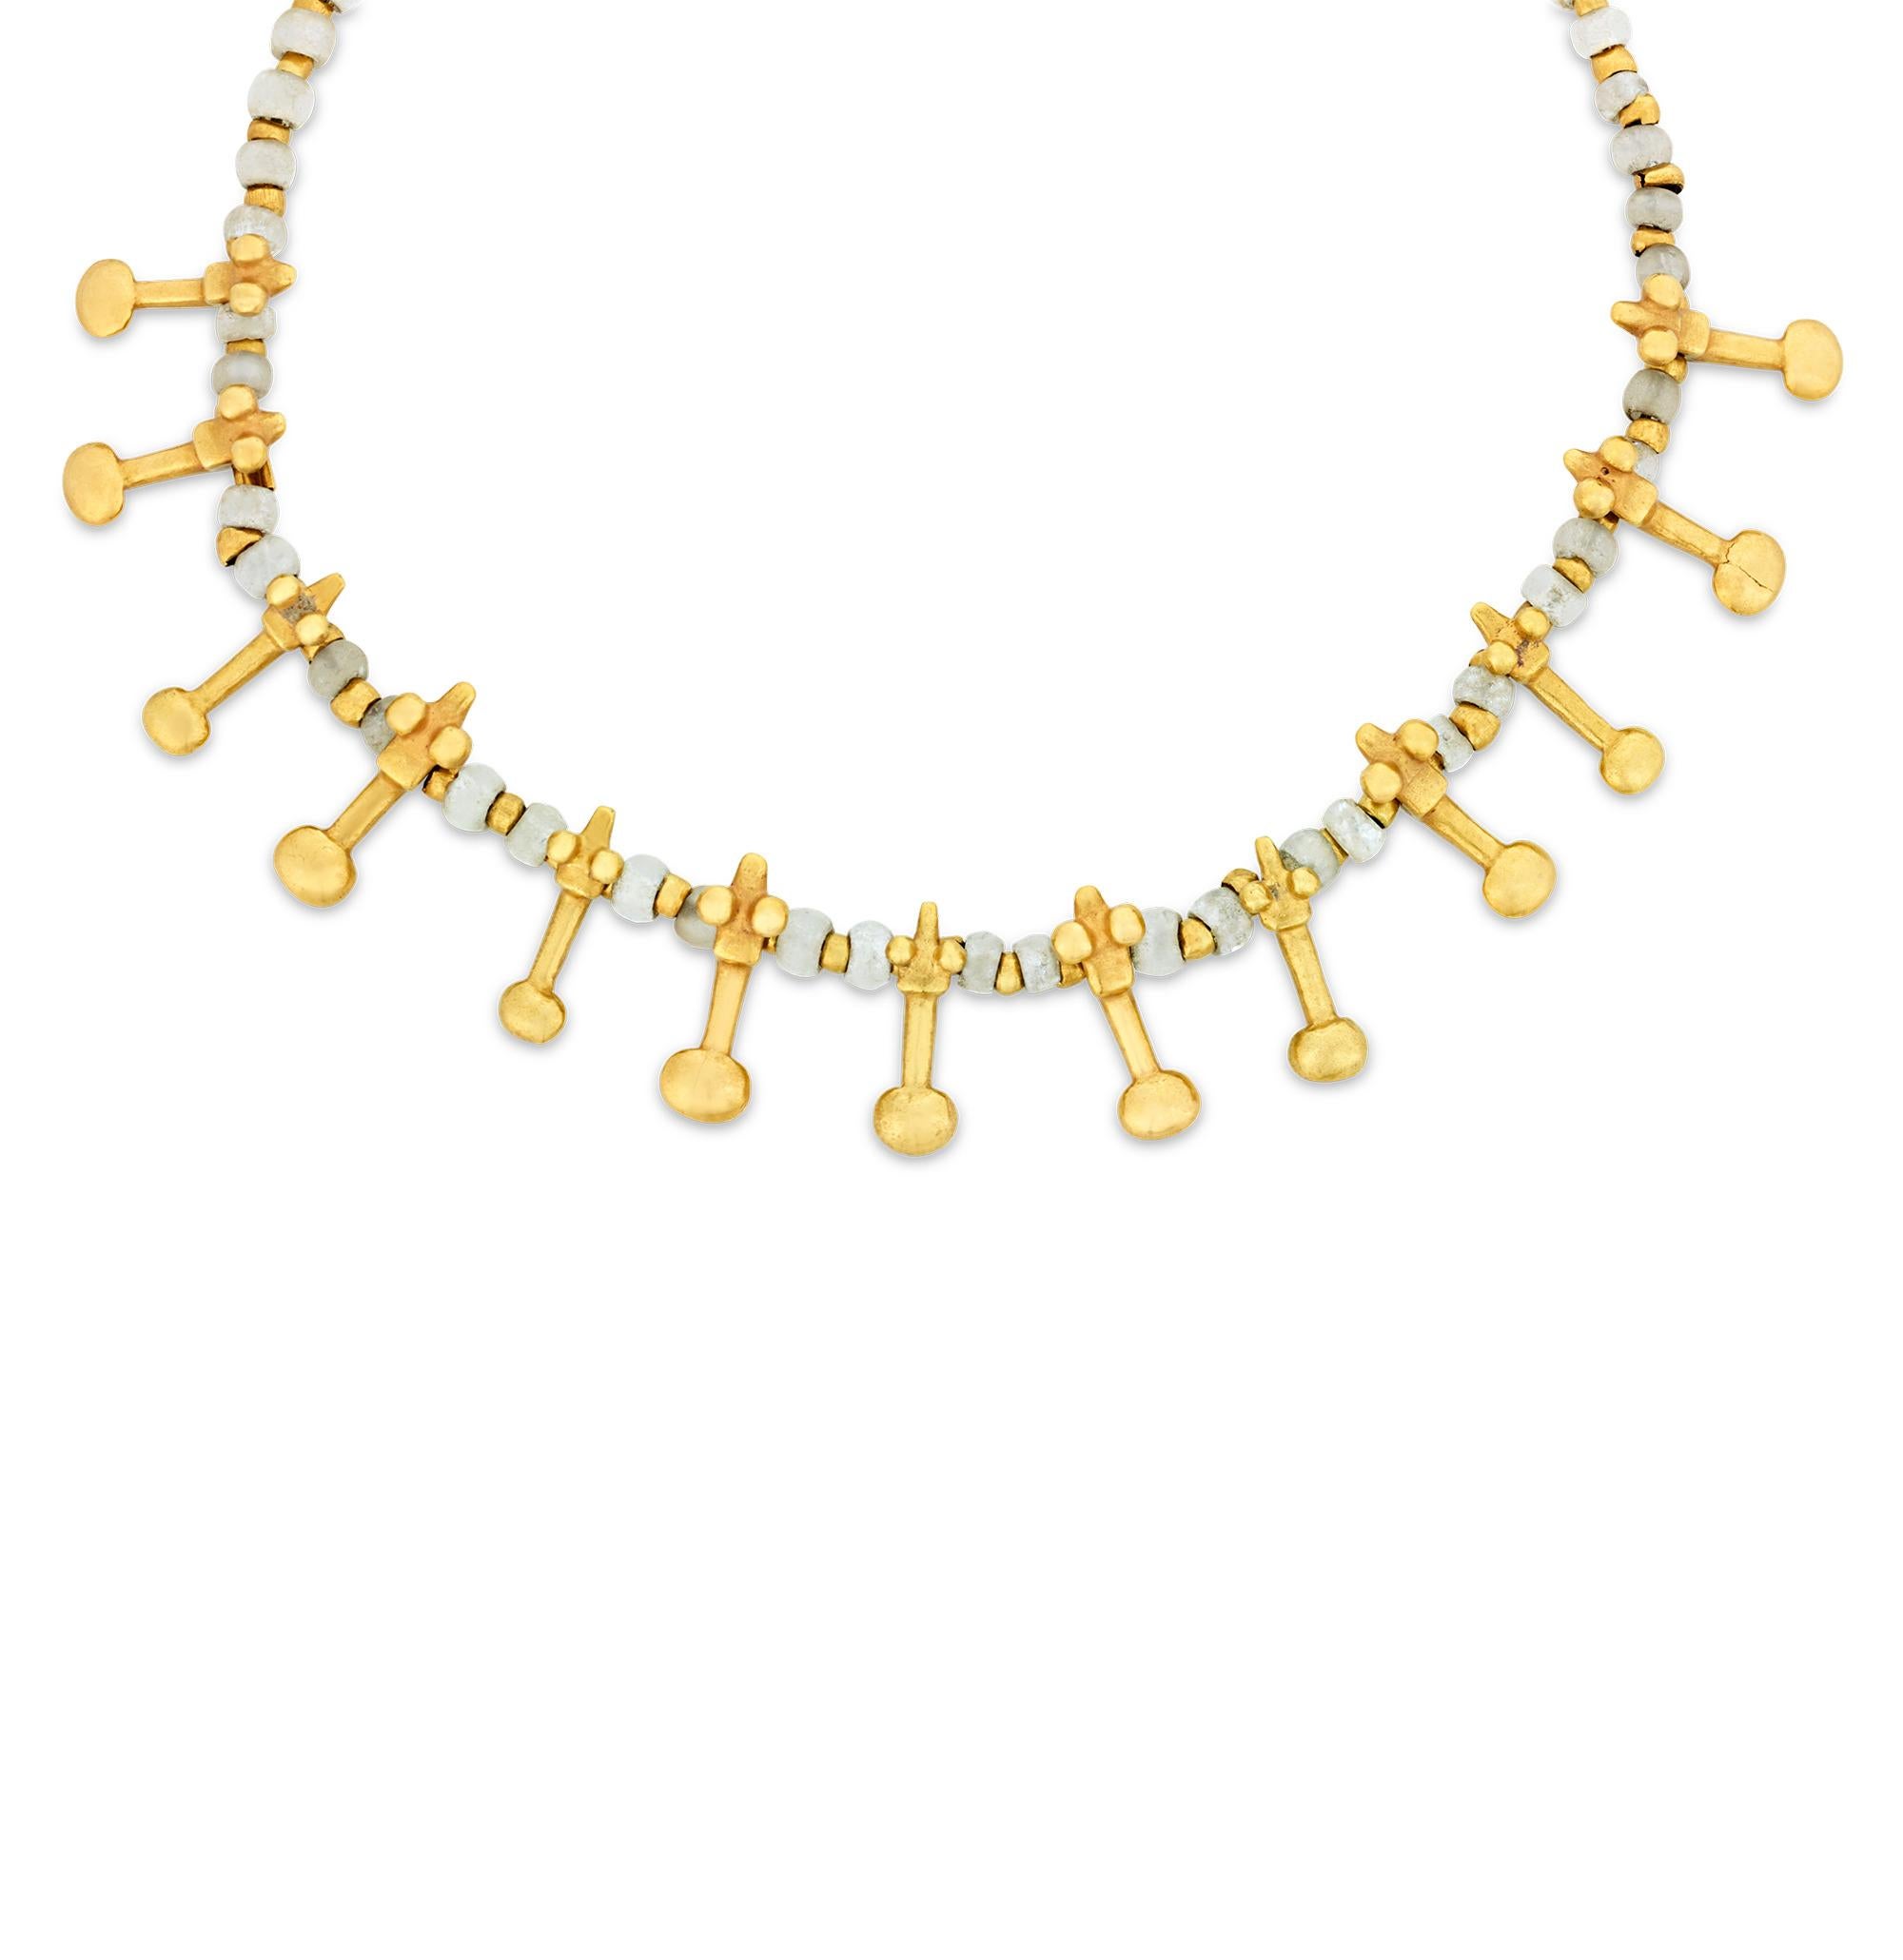 This gold and bead necklace, was crafted by a pre-Columbian artisan from the Gran Coclé area of Panama. It represents a rich cultural tradition of adornment, utilizing some of the most advanced gold-casting techniques known to the world at that